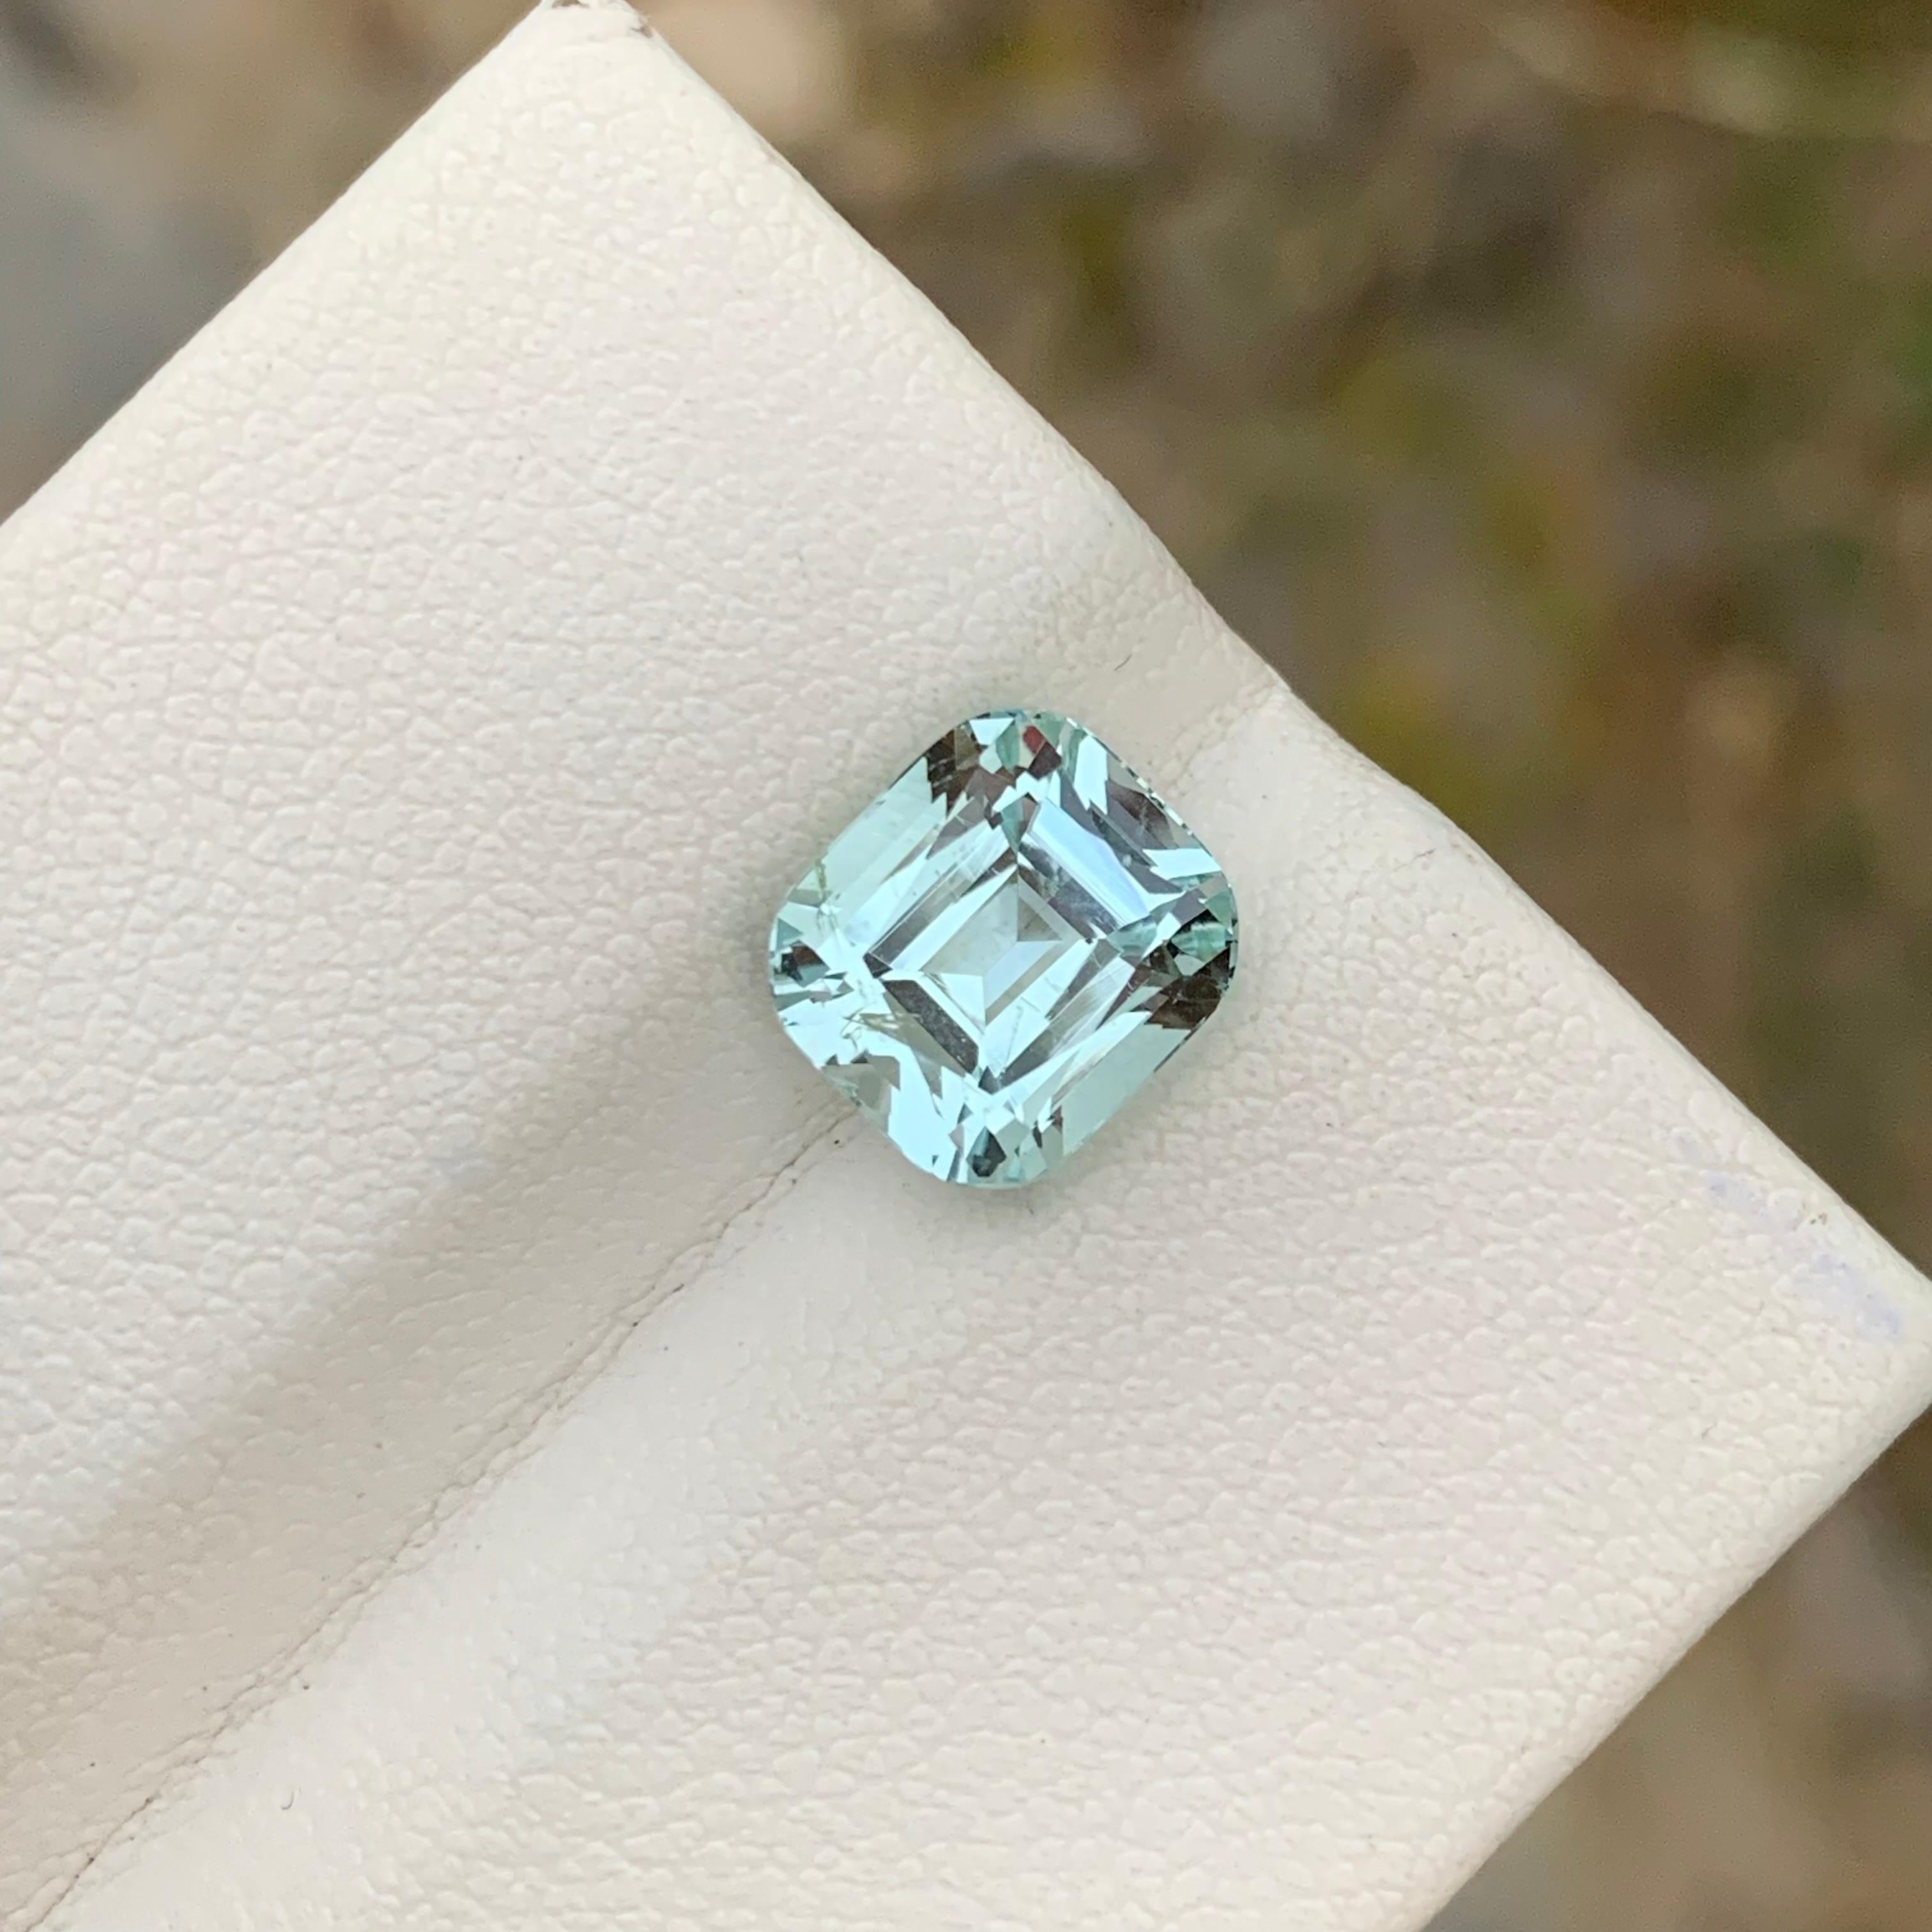 3.55 Carats Natural Loose Aquamarine Ring Gem From Shigar Valley Mine For Sale 7